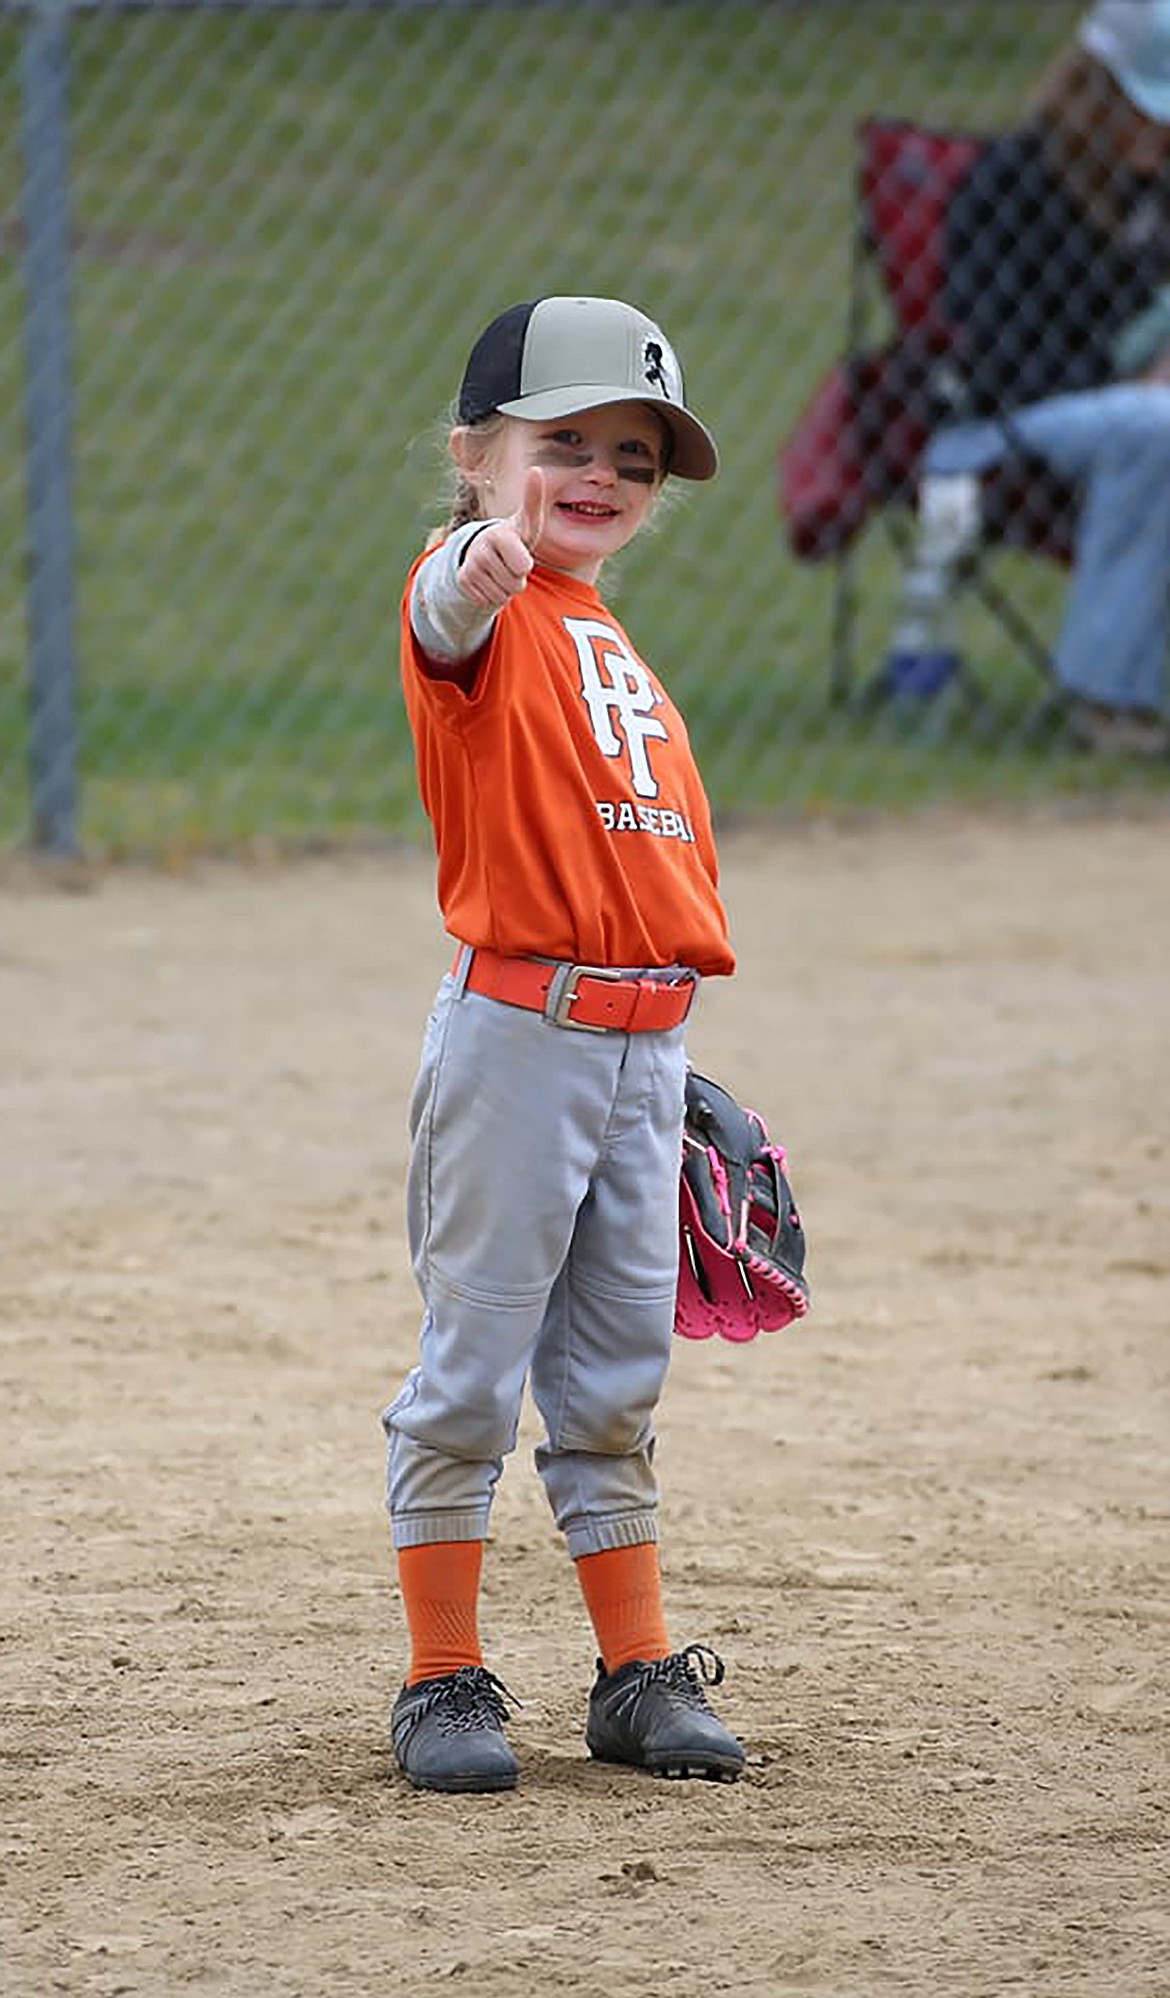 Catie Clayburn shared this Best Shot of a young baseball star saying hello to her fans. If you have a photo that you took that you would like to see run as a Best Shot or I Took The Bee send it to the Bonner County Daily Bee, P.O. Box 159, Sandpoint, Idaho, 83864; or drop them off at 310 Church St., Sandpoint. You may also email your pictures to the Bonner County Daily Bee along with your name, caption information, hometown and phone number to news@bonnercountydailybee.com.